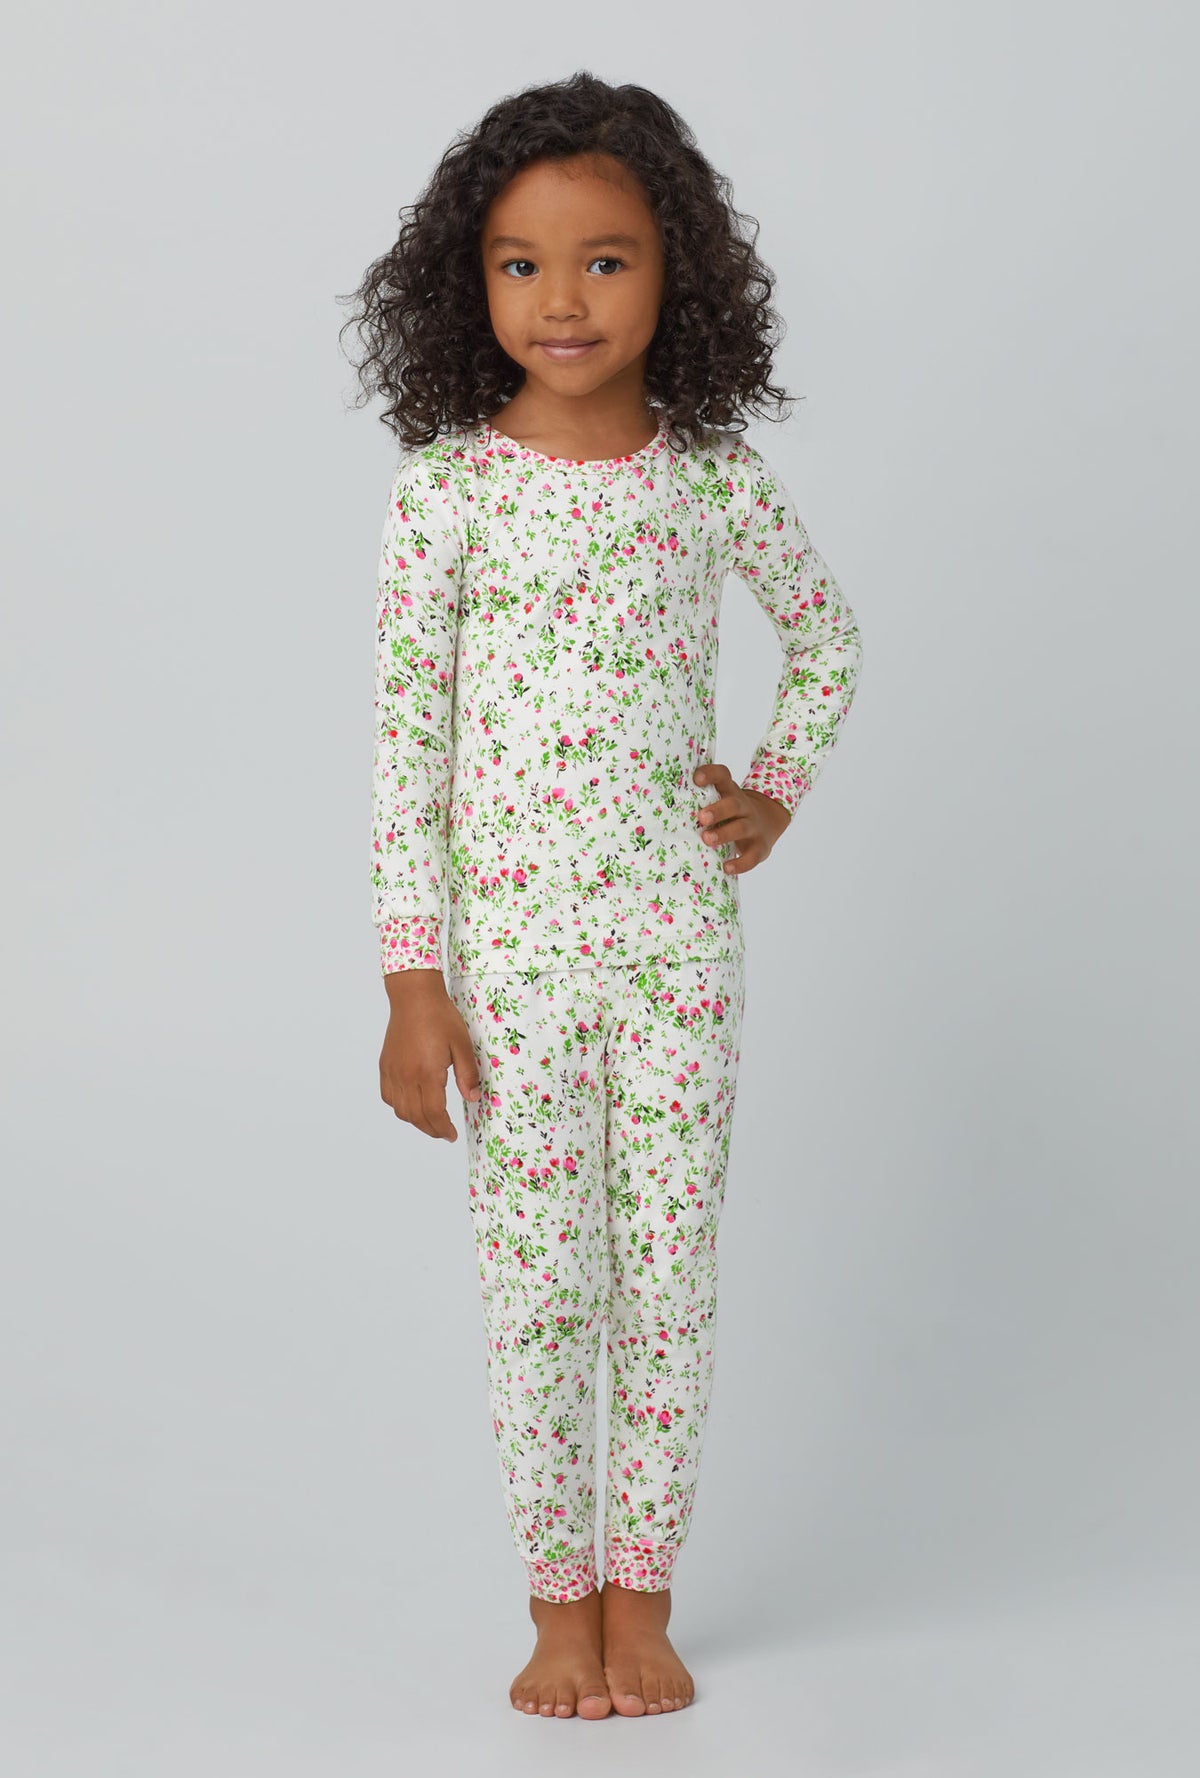 A girl wearing Long Sleeve Stretch Jersey Kids PJ Set with nellie print